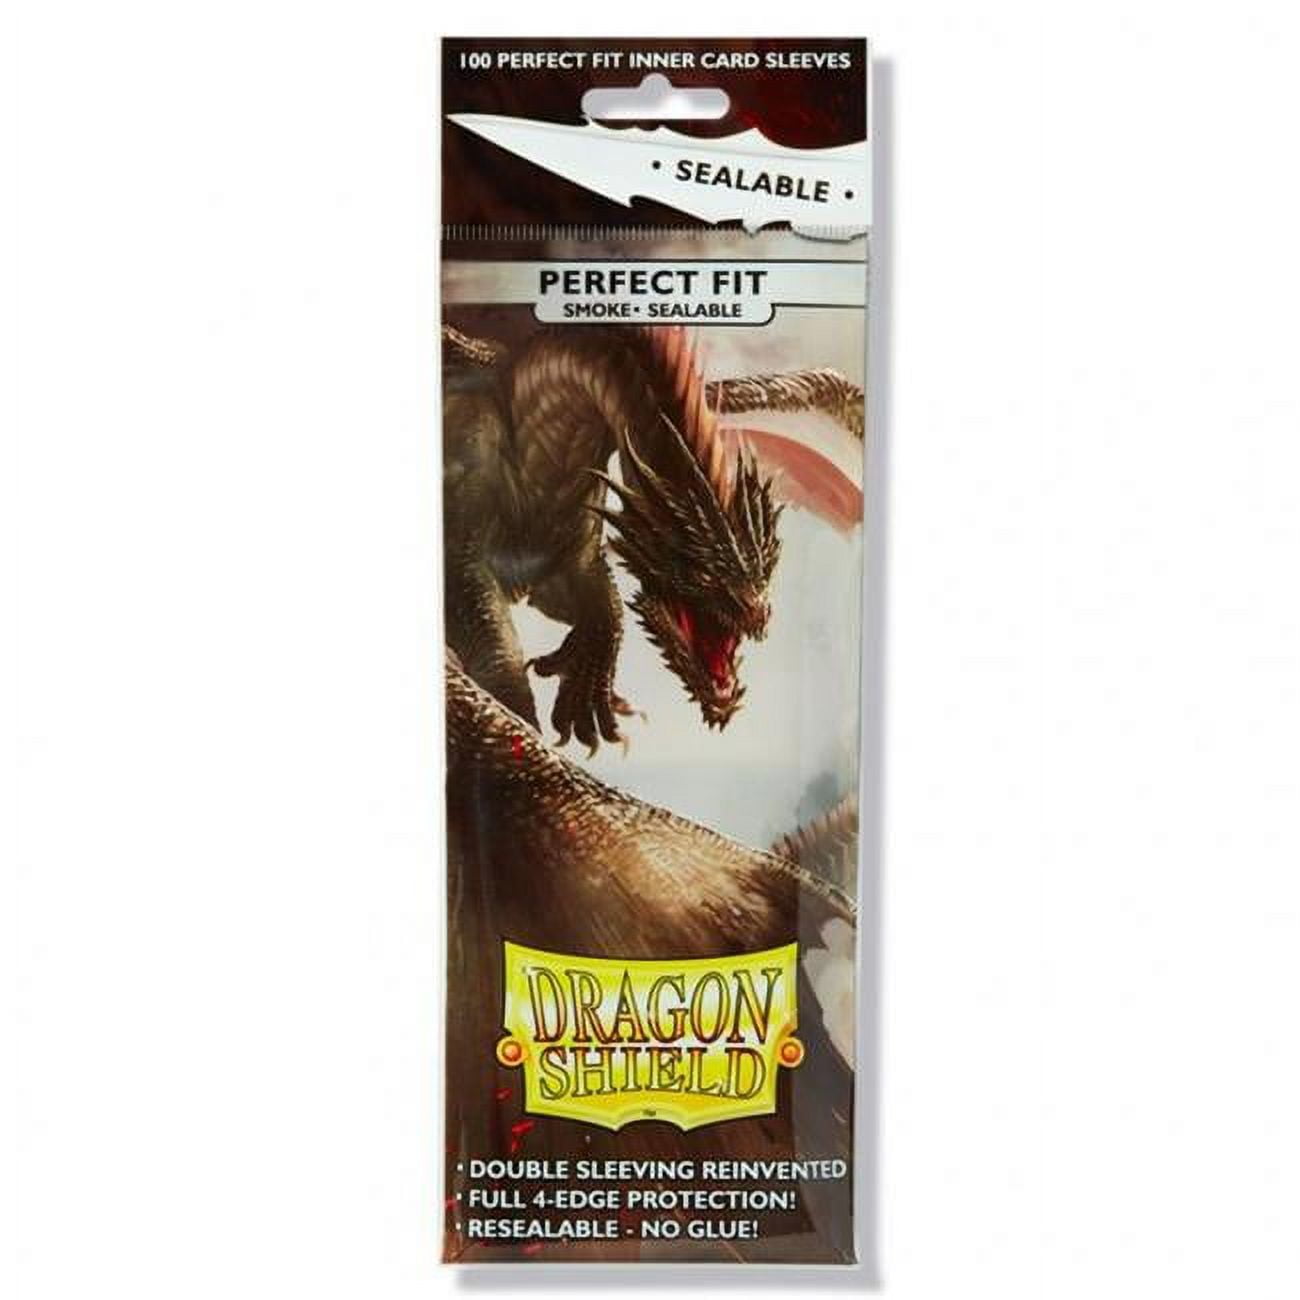 Atm13223 Dragon Shield Sealable Perfect Fit Inner Card Sleeves - Smoke, 100 Count